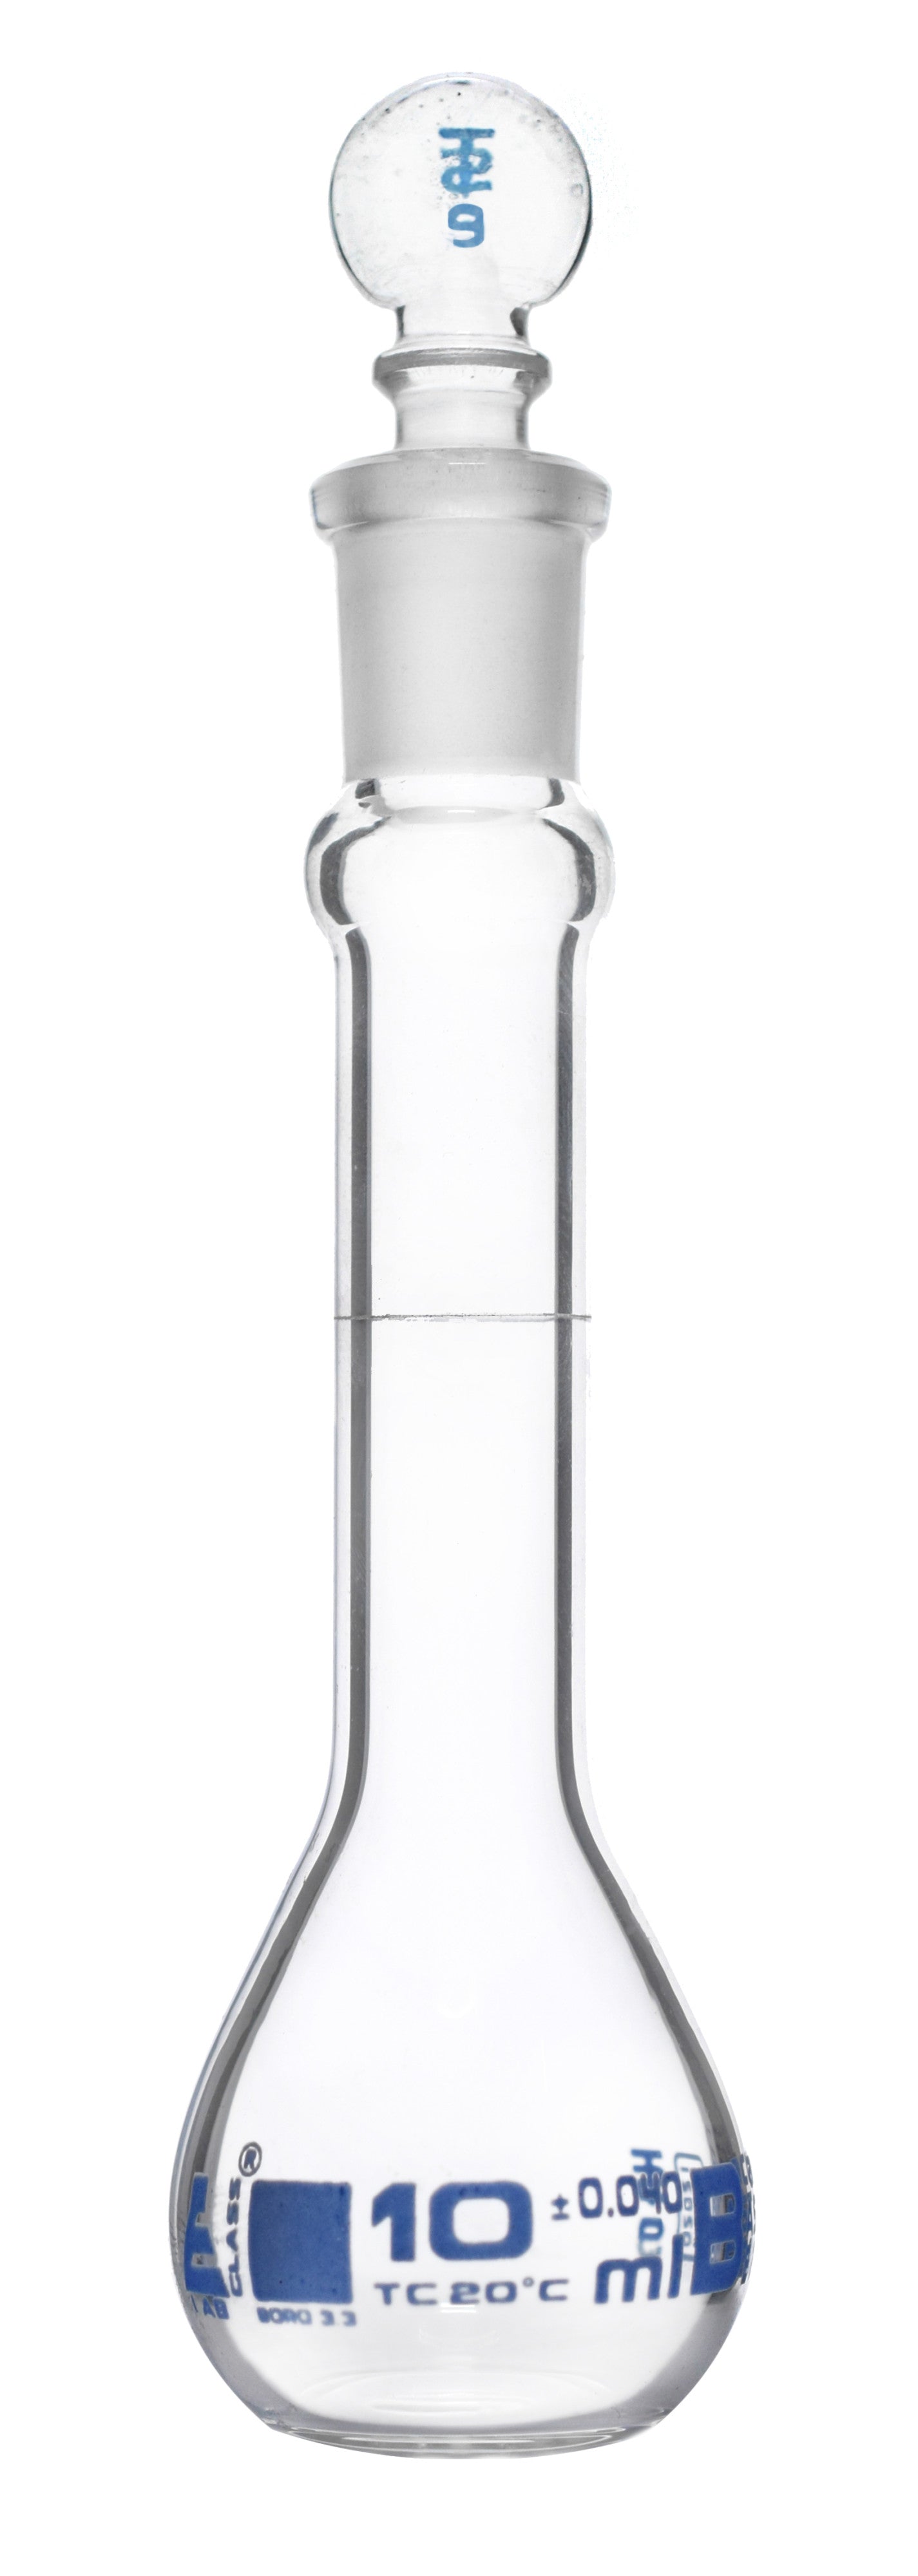 Borosilicate Glass ASTM Volumetric Flask with Glass Stopper, 10 ml, Class B, Autoclavable